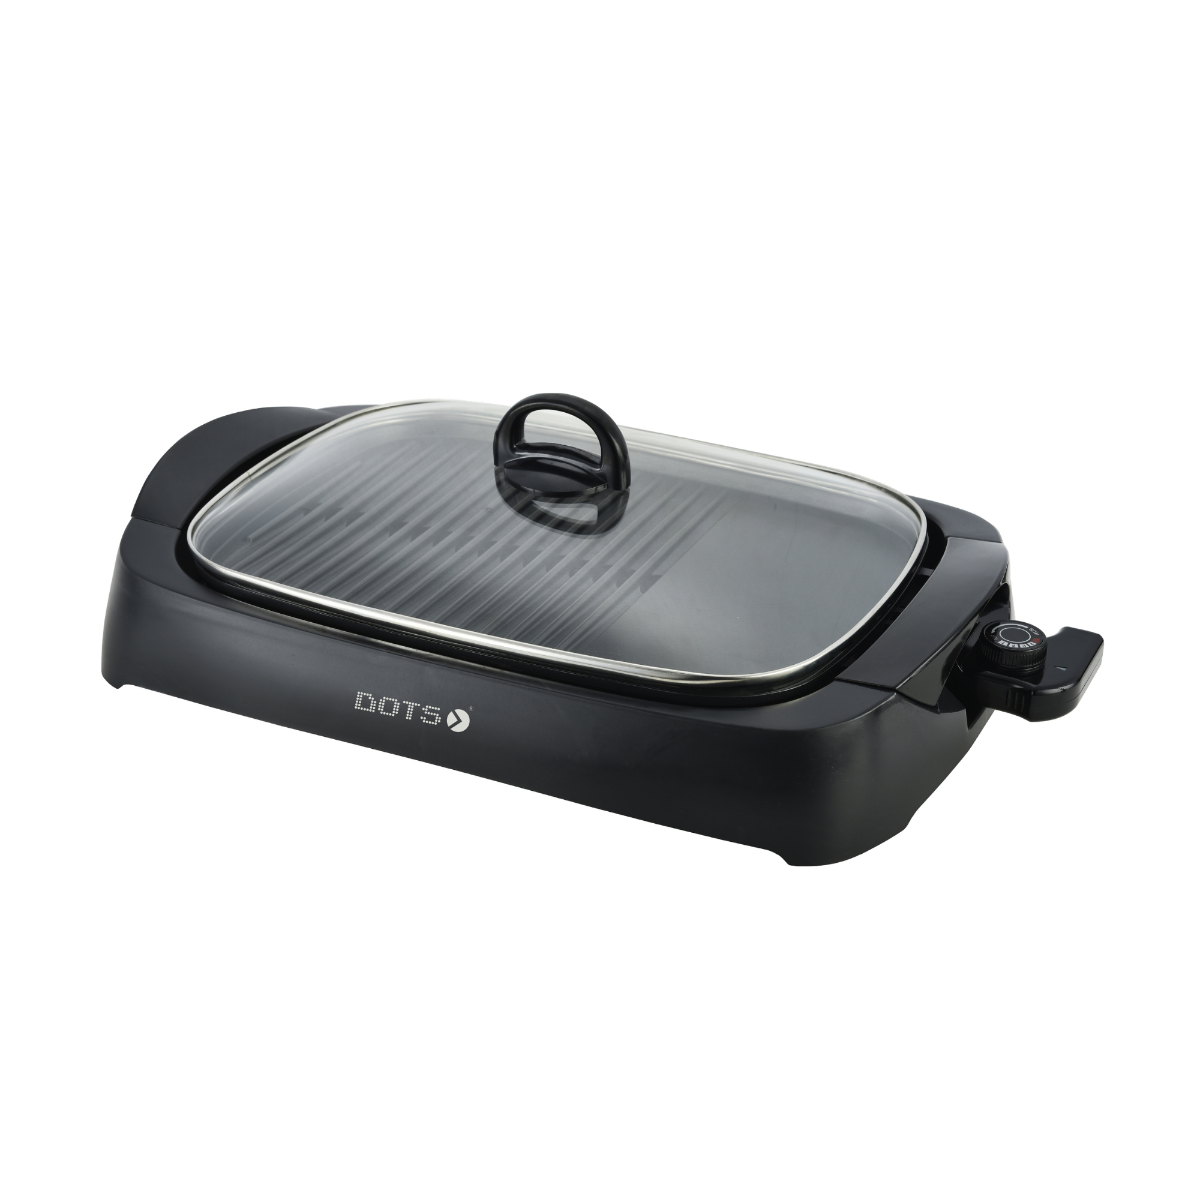 Dots Electric Grill, 2000W,Non-stick coating, Black,SMD-112